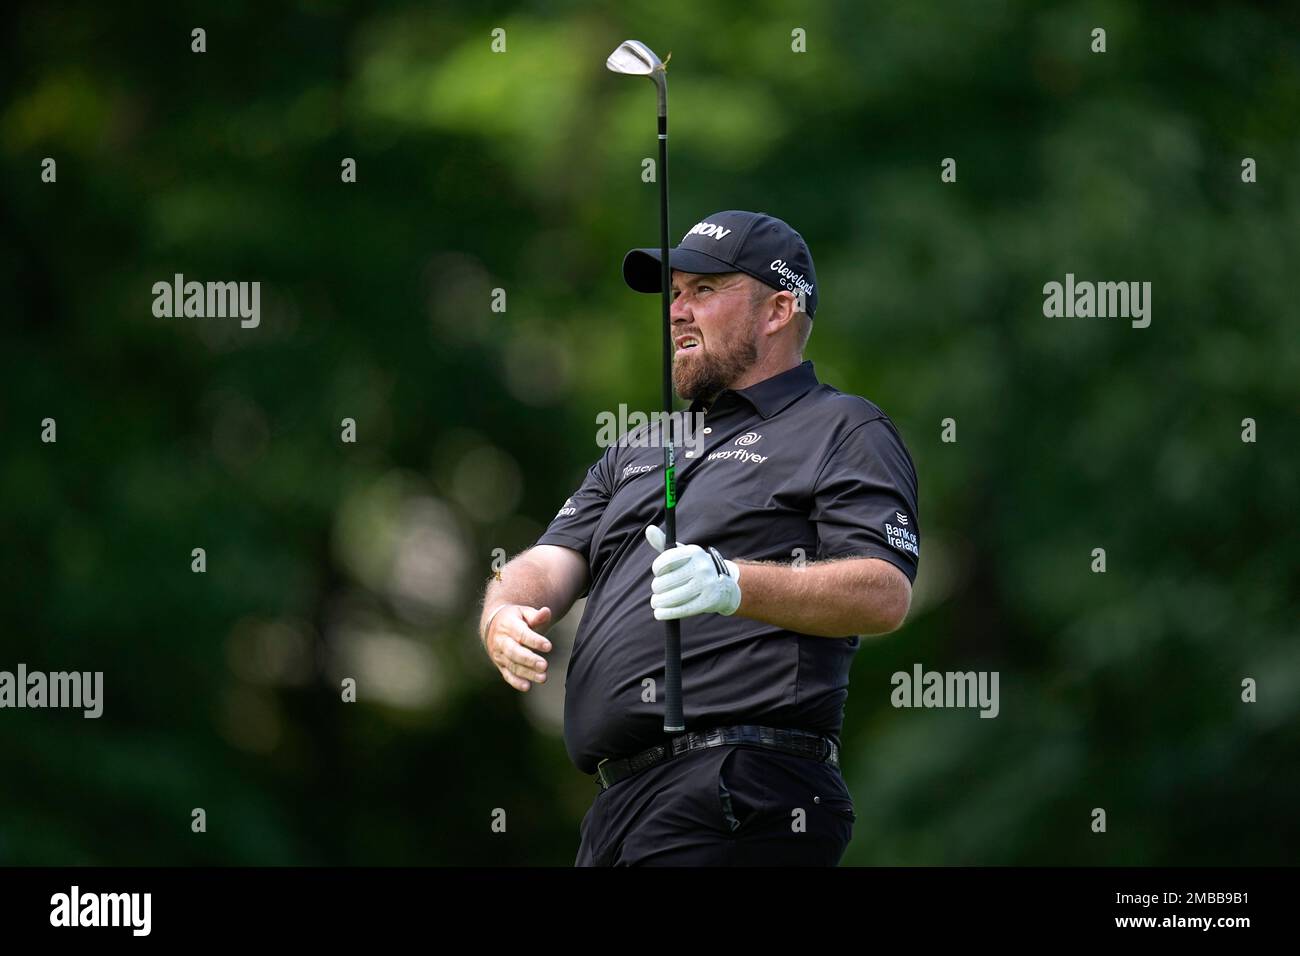 Shane Lowry, of Ireland, watches his shot on the ninth fairway during the first round of the Memorial golf tournament, Thursday, June 2, 2022, in Dublin, Ohio